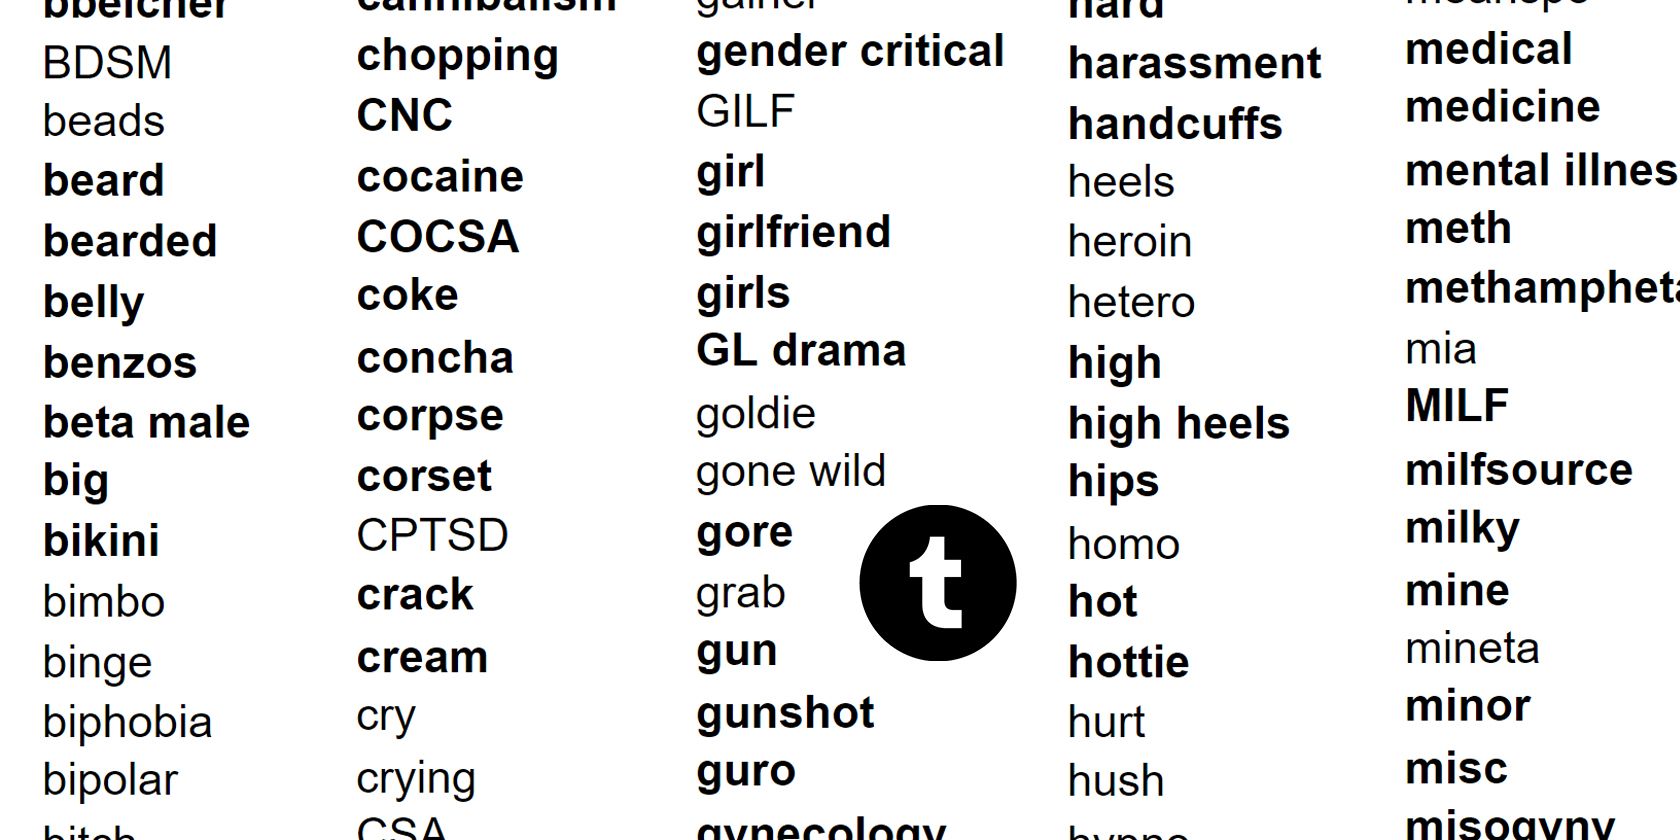 Tumblr Has Banned a Long List of Harmless Tags, but Why